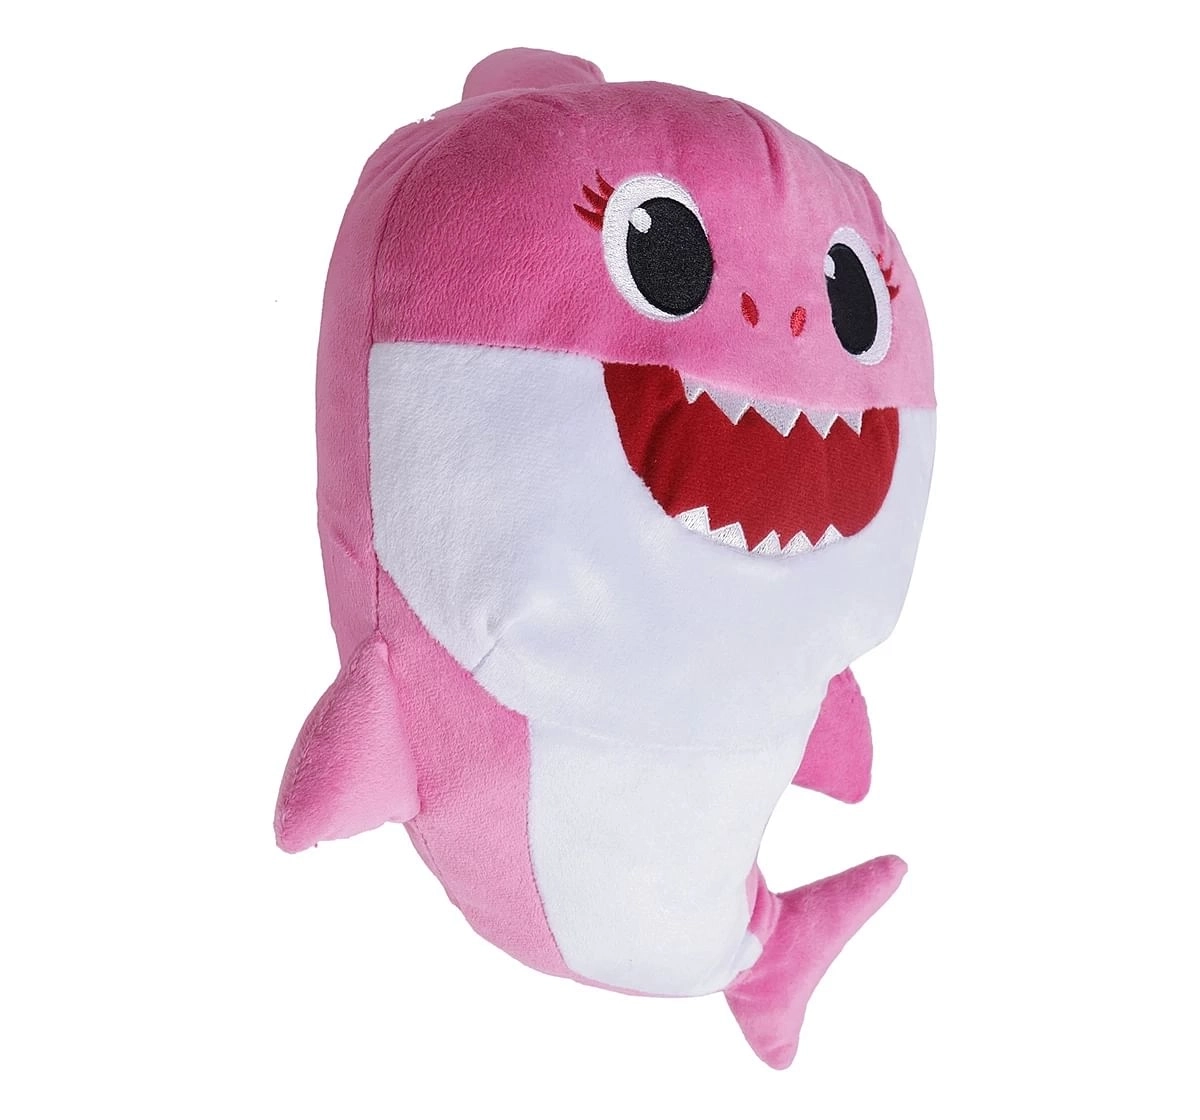 Baby Shark Plush Singing Plush Toy 8 Inch Mommy Shark for 1 Year and Above